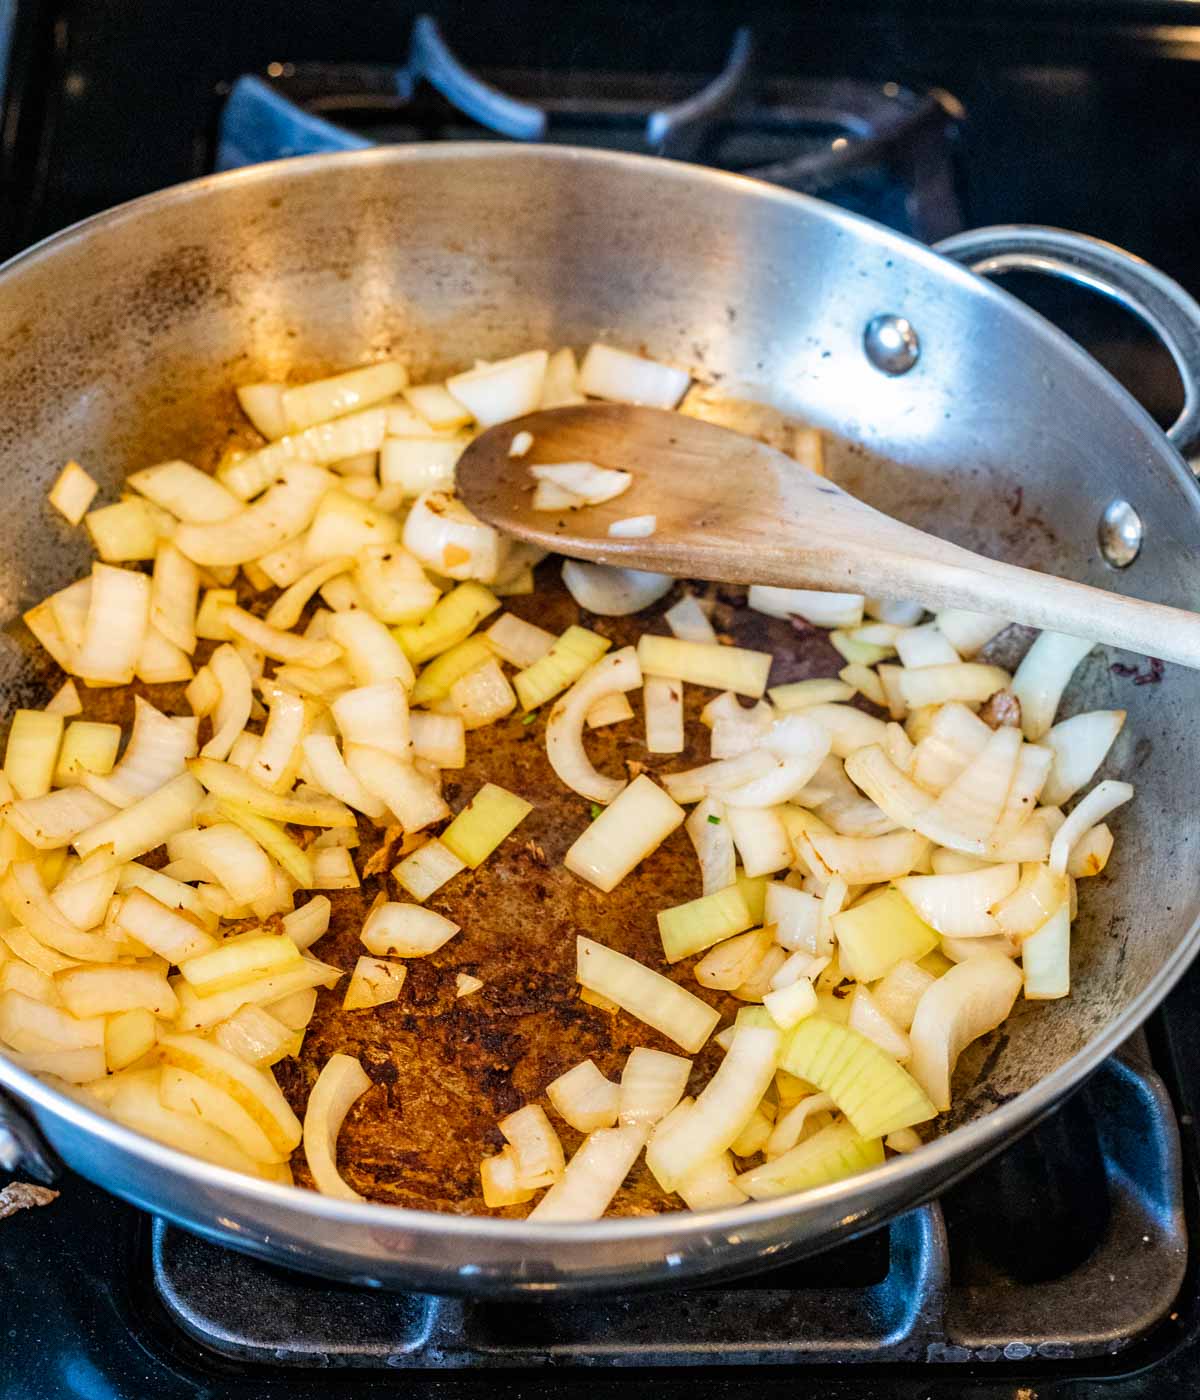 Onions sautéing in a skillet on the stovetop.